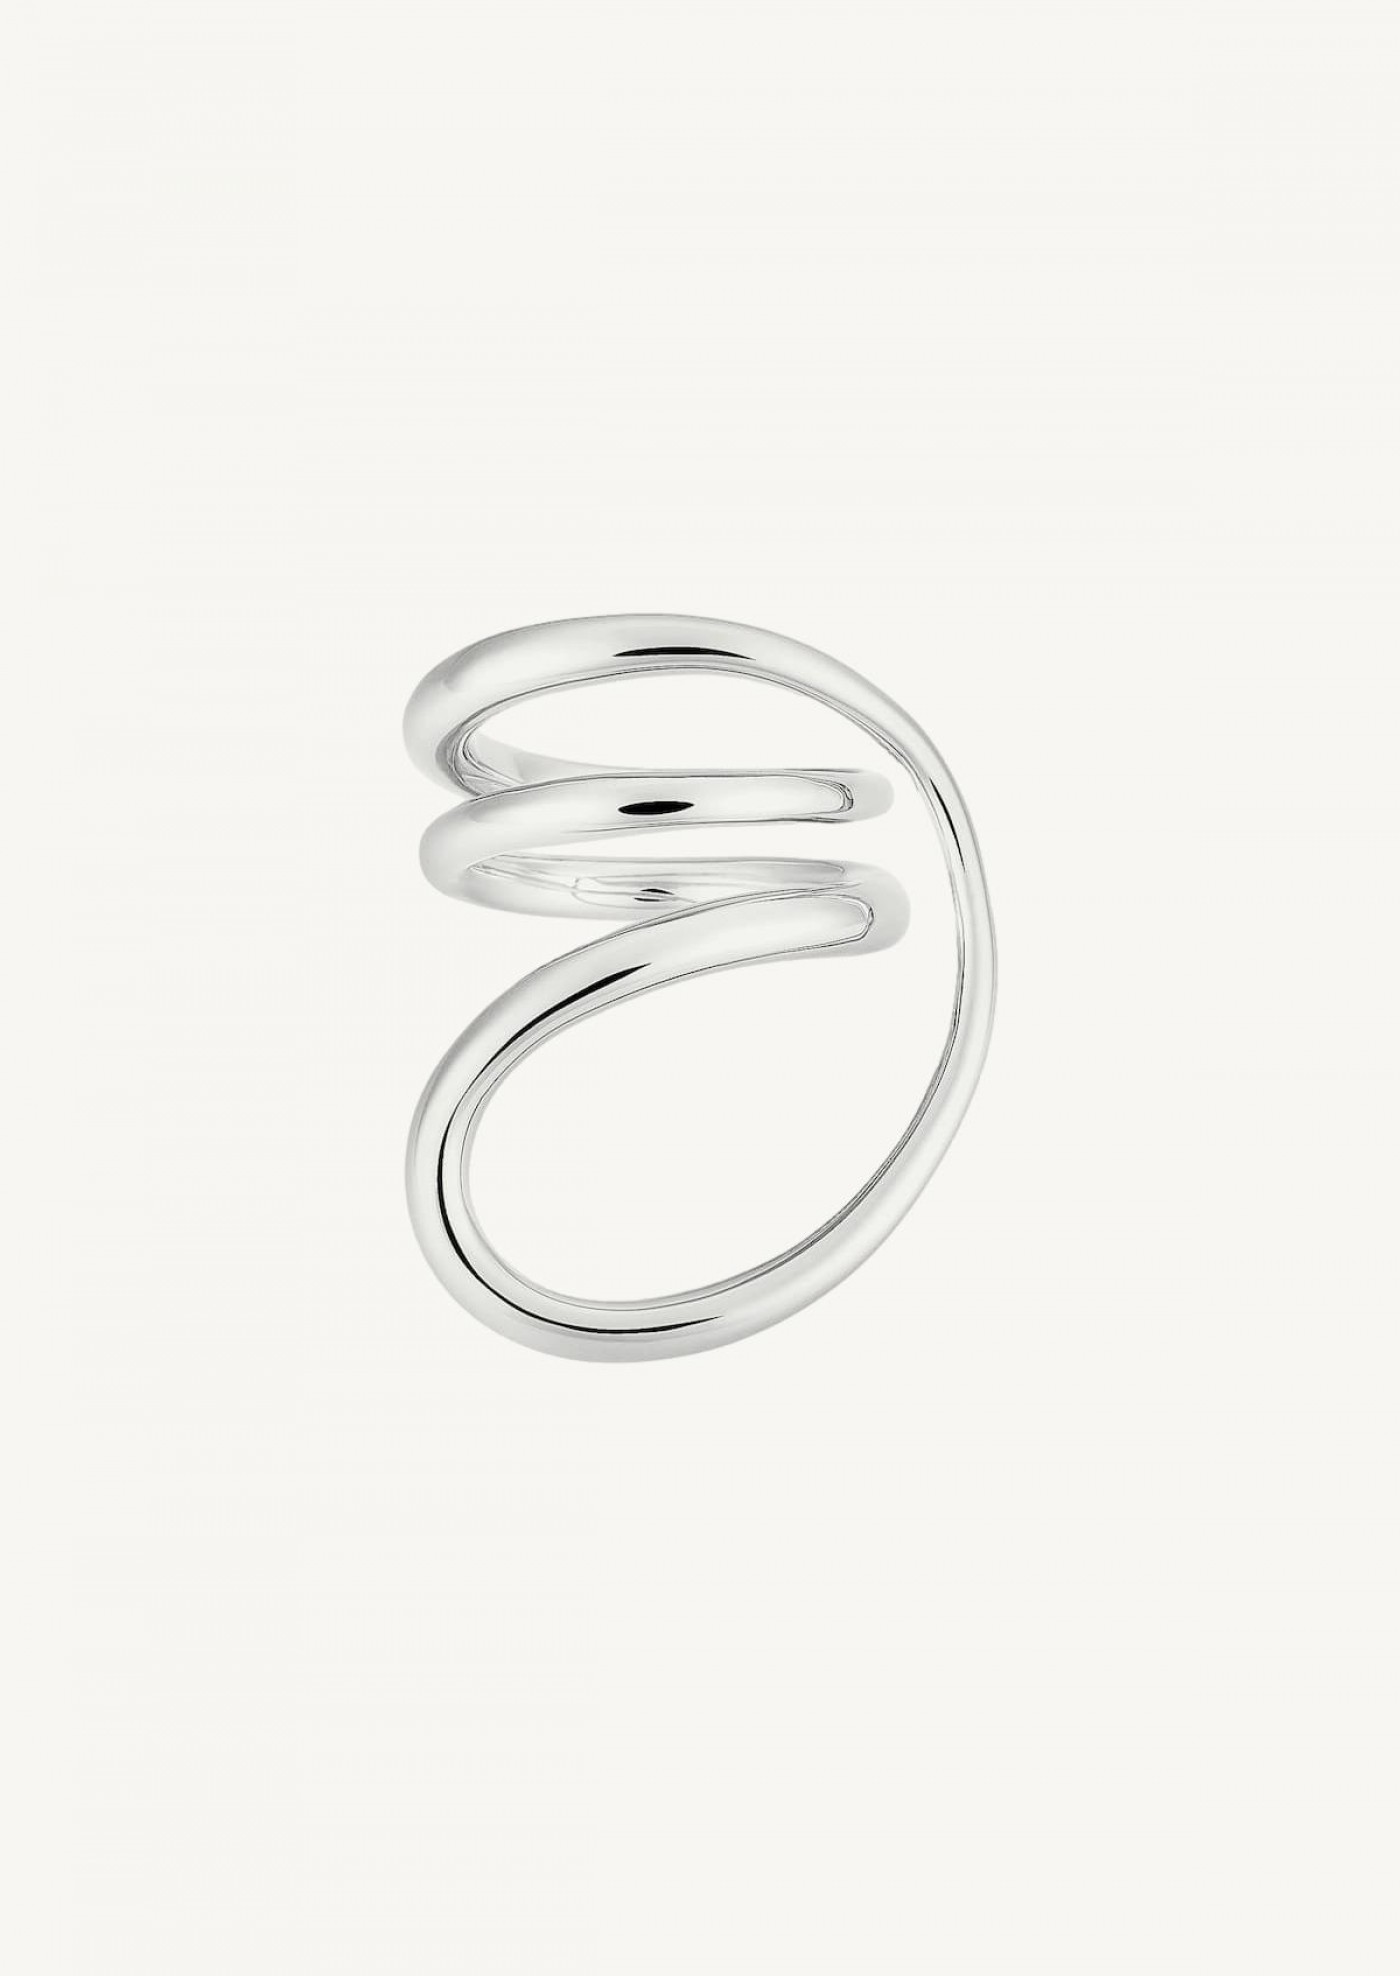 Iconic Round Trip ring in silver